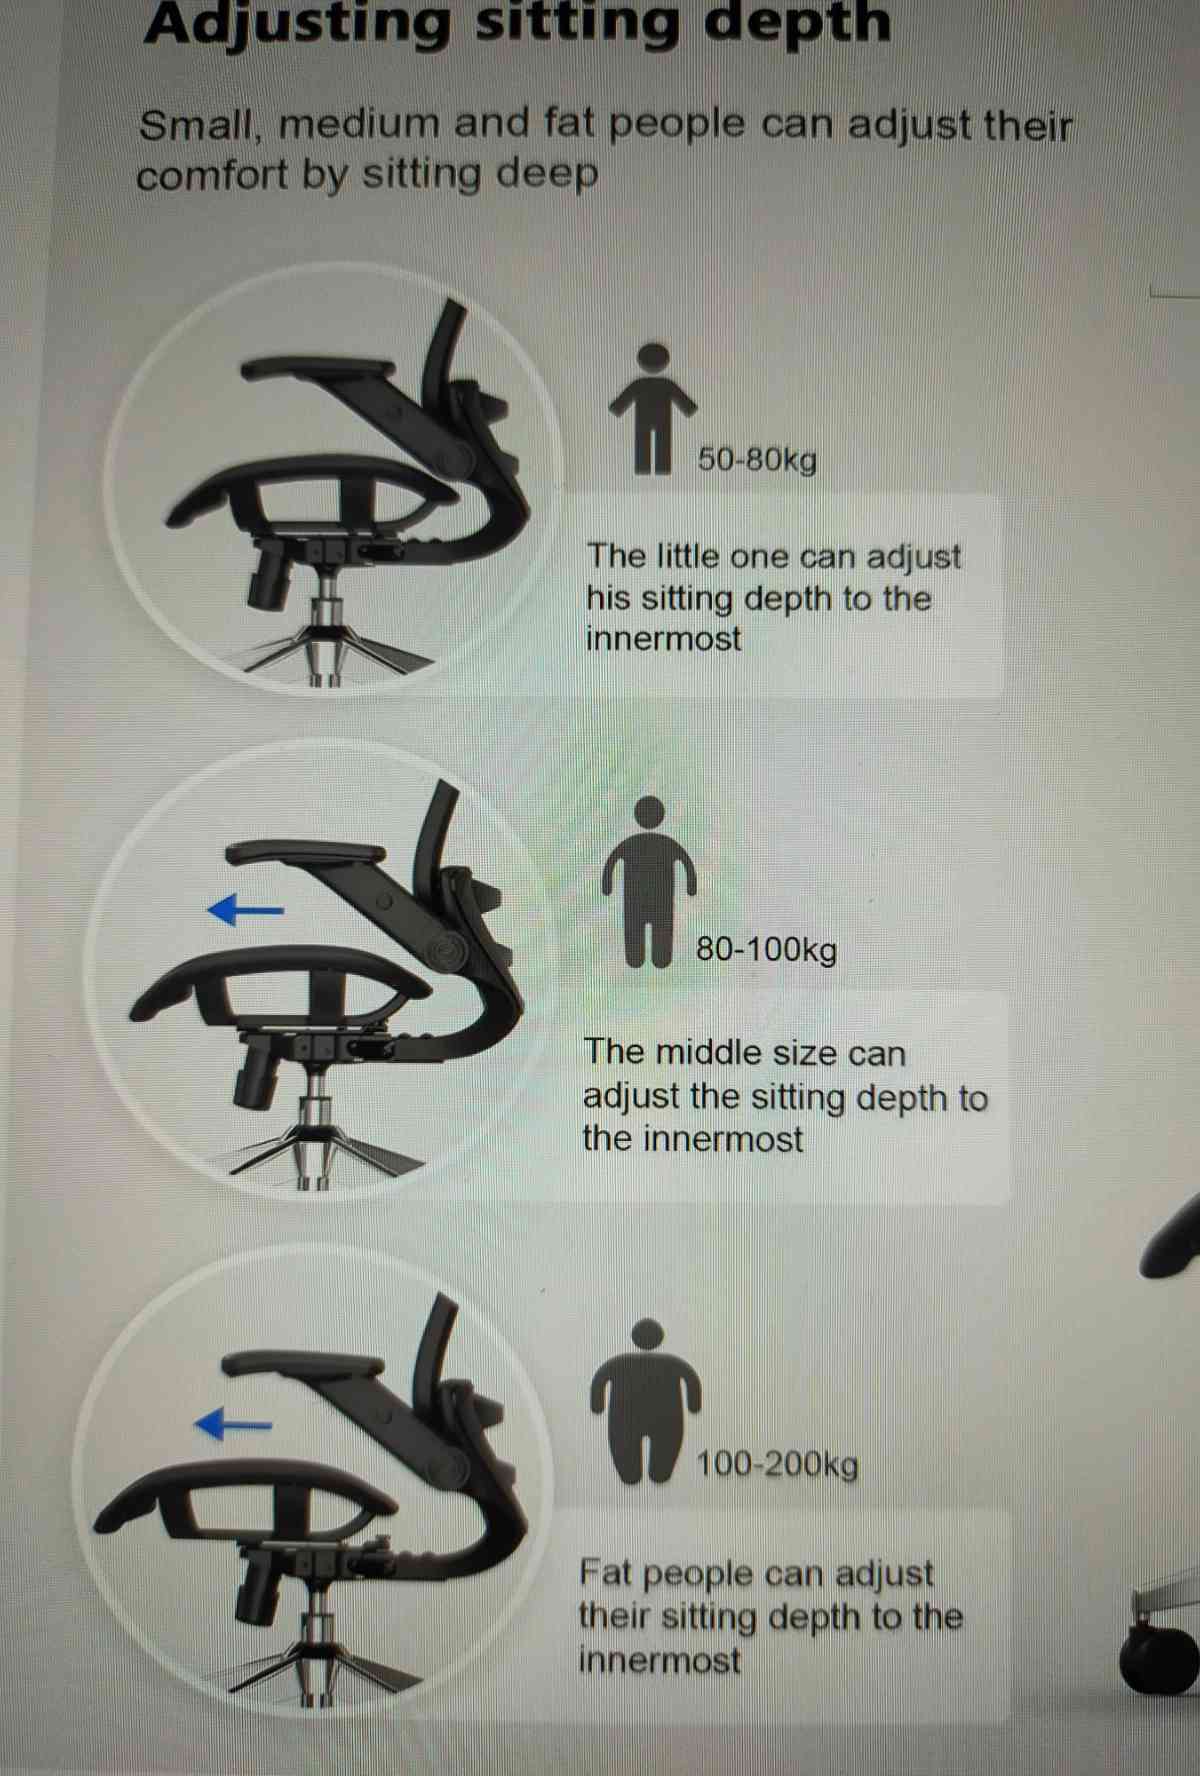 Shopping for a new chair.. These size classifications are brutal